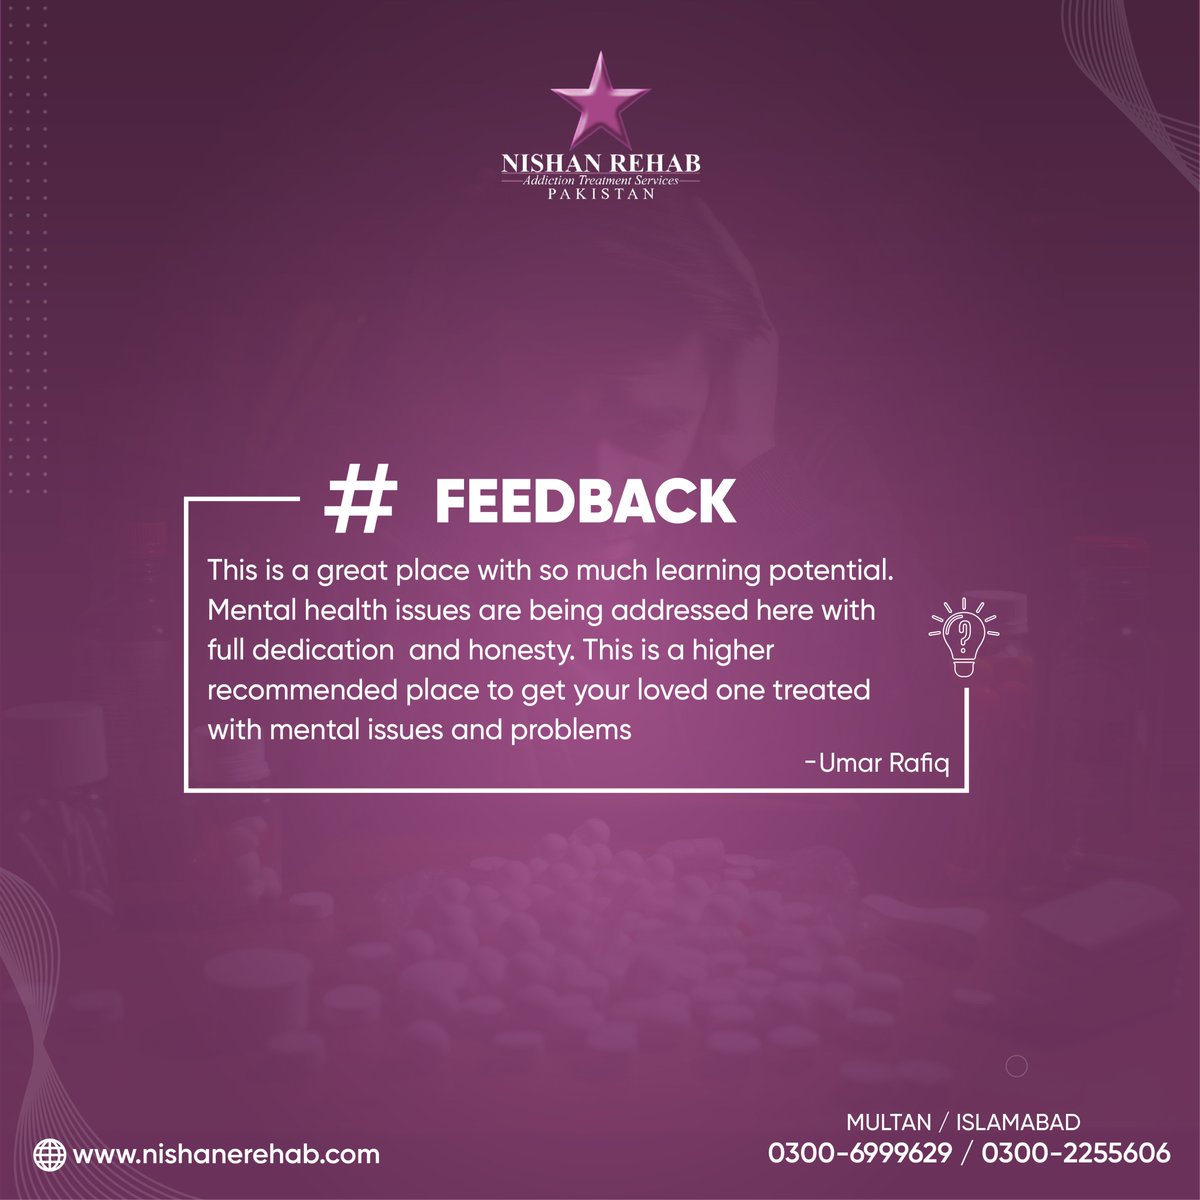 We're overjoyed by the positive feedback shared by one of our patients.

#Rehabcenter #rehabsuccess #Nishanrehab #Patientfeedback #alcoholism #addiction #recovery #alcoholic #mentalhealth #soberlife #drugaddiction #alcoholfree #life #addicted #selfcare